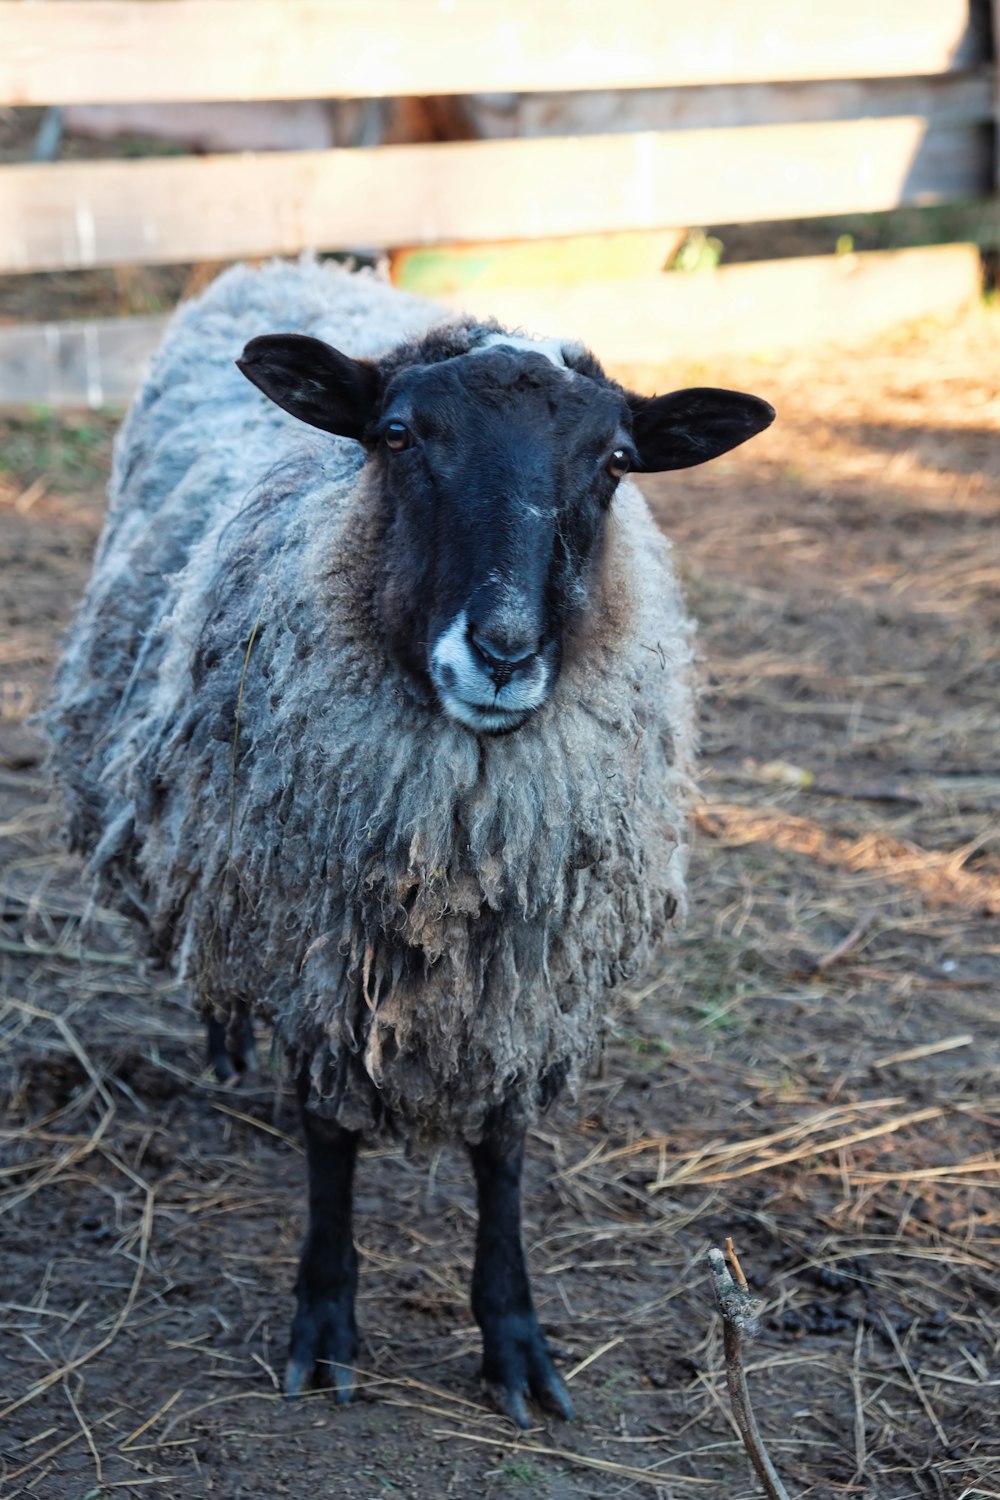 a black faced sheep standing in a fenced in area